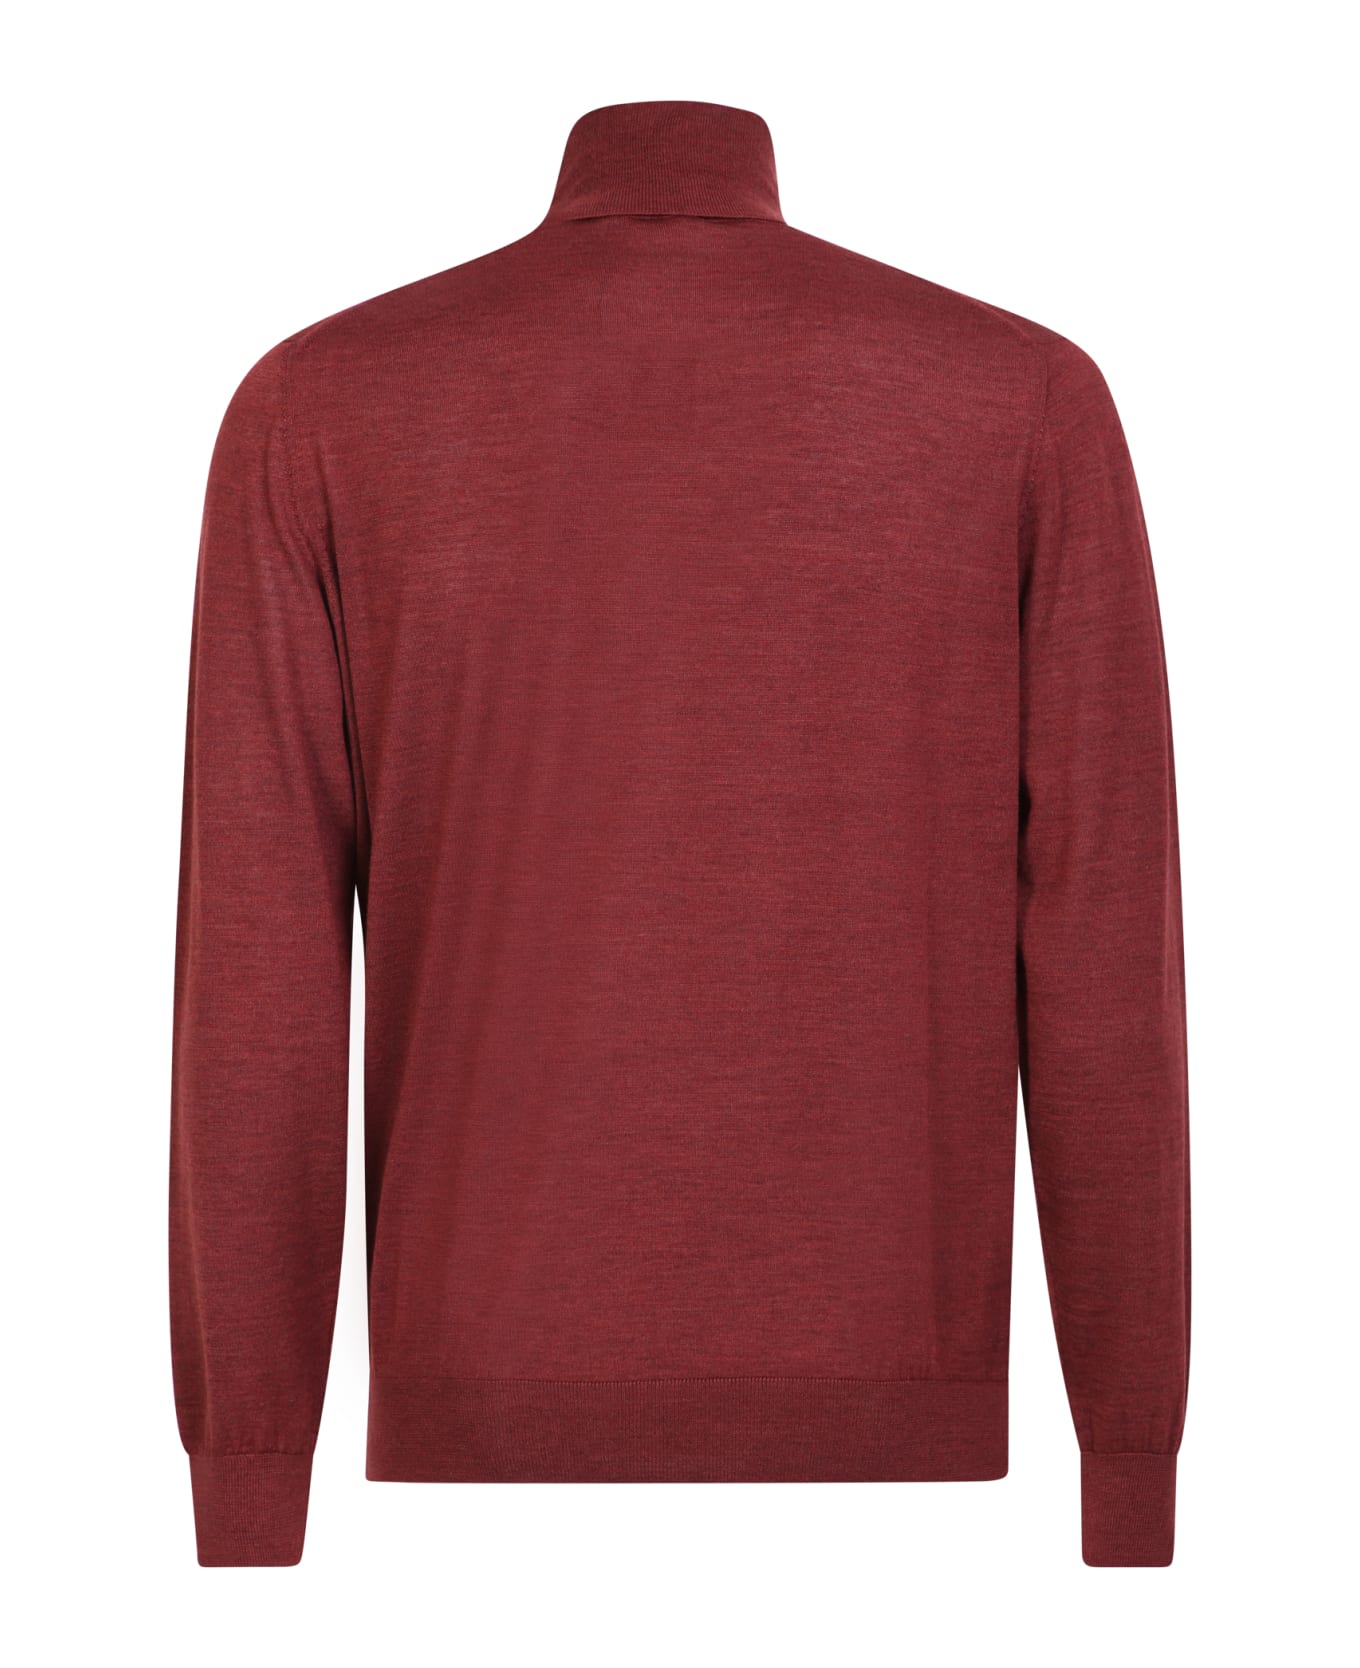 Colombo Silk And Cashmere Sweater - Bordeaux